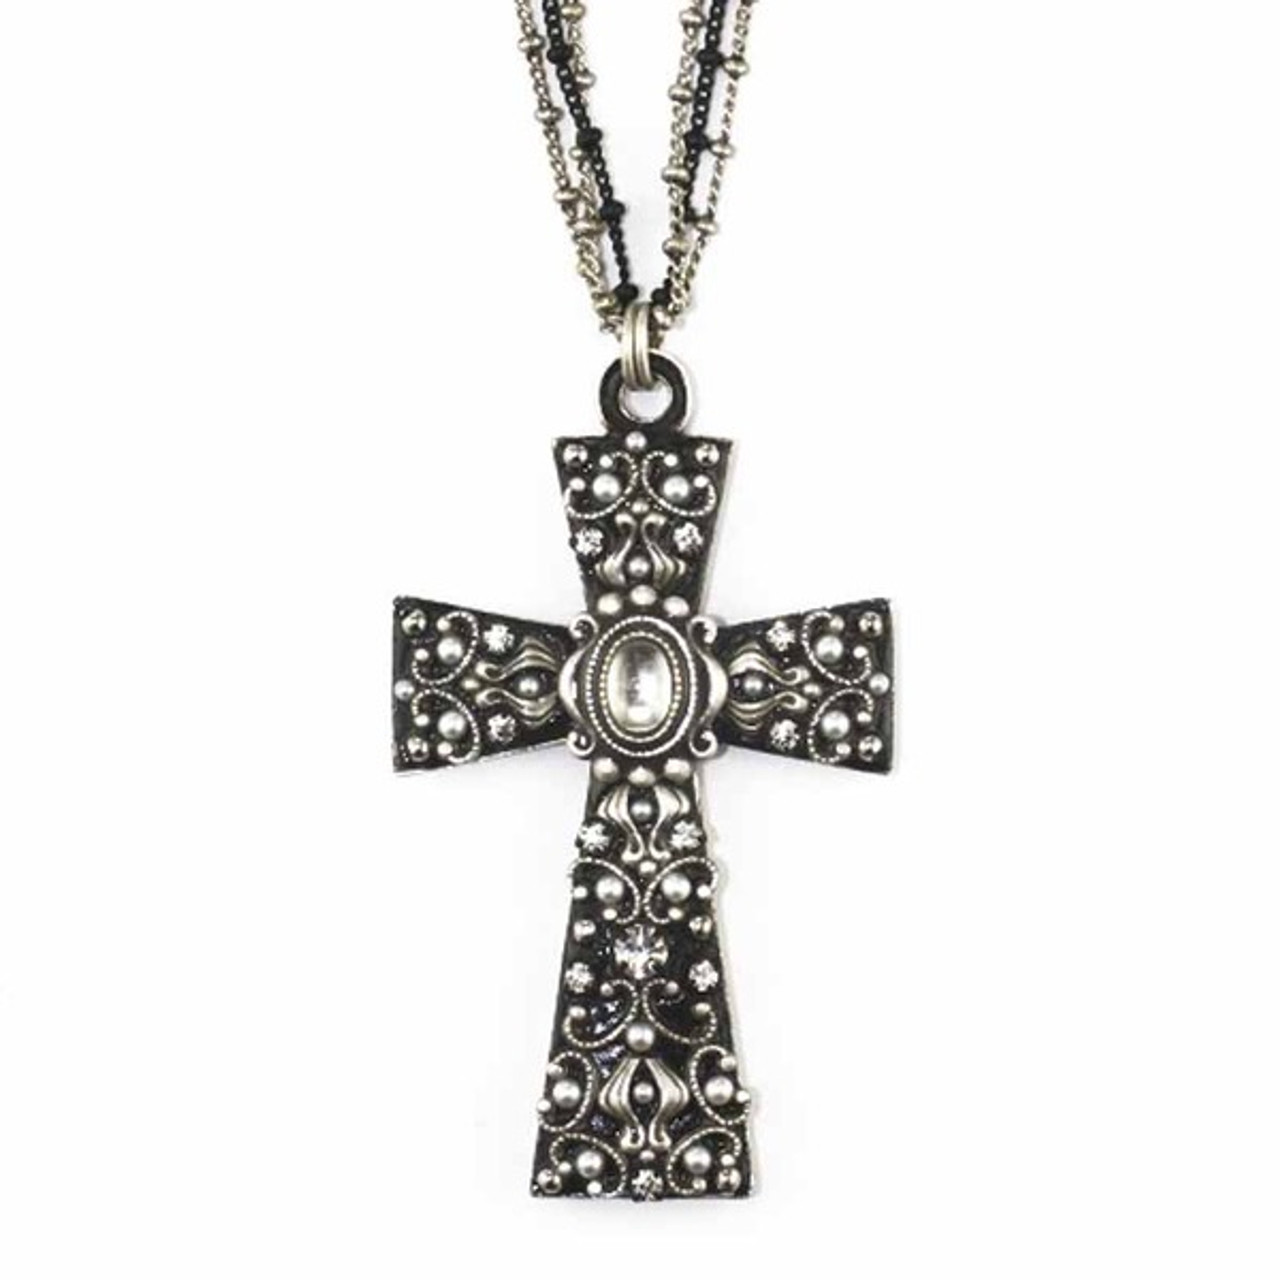 Black and White Large Cross Necklace